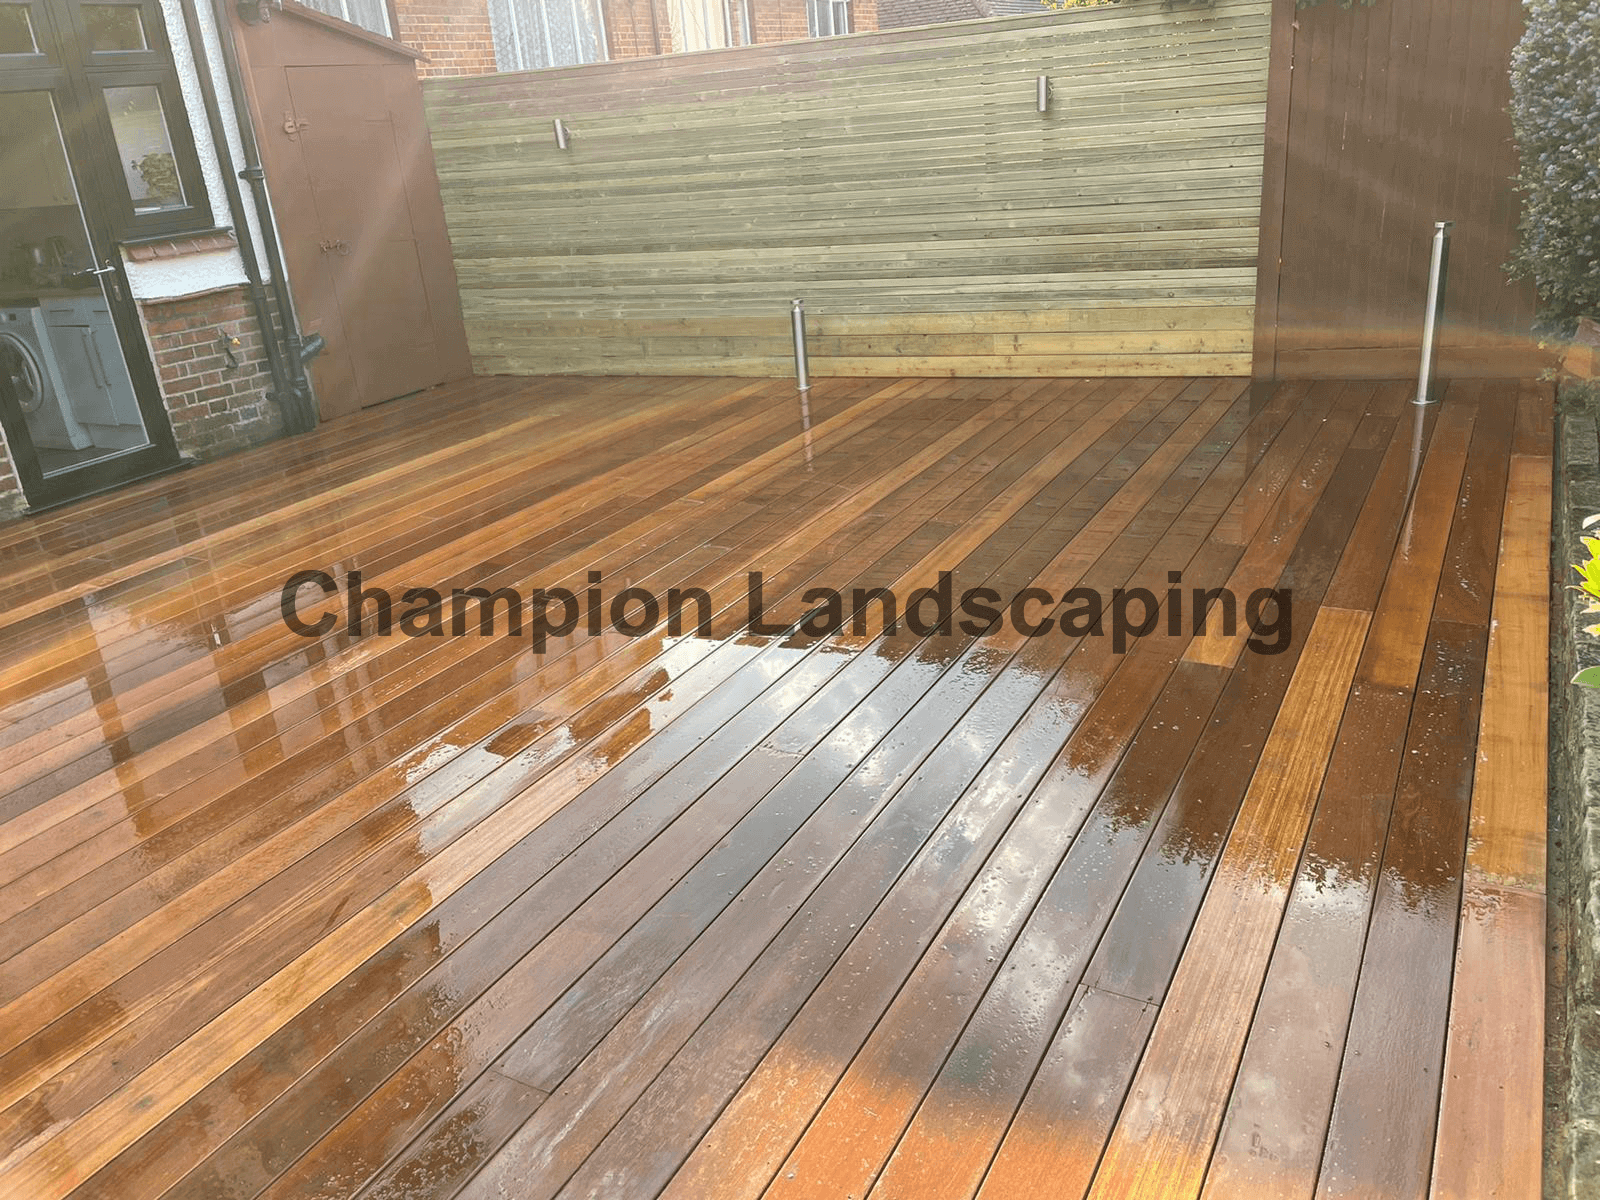 https://www.championlandscaping.co.uk/wp-content/uploads/2021/10/5.png